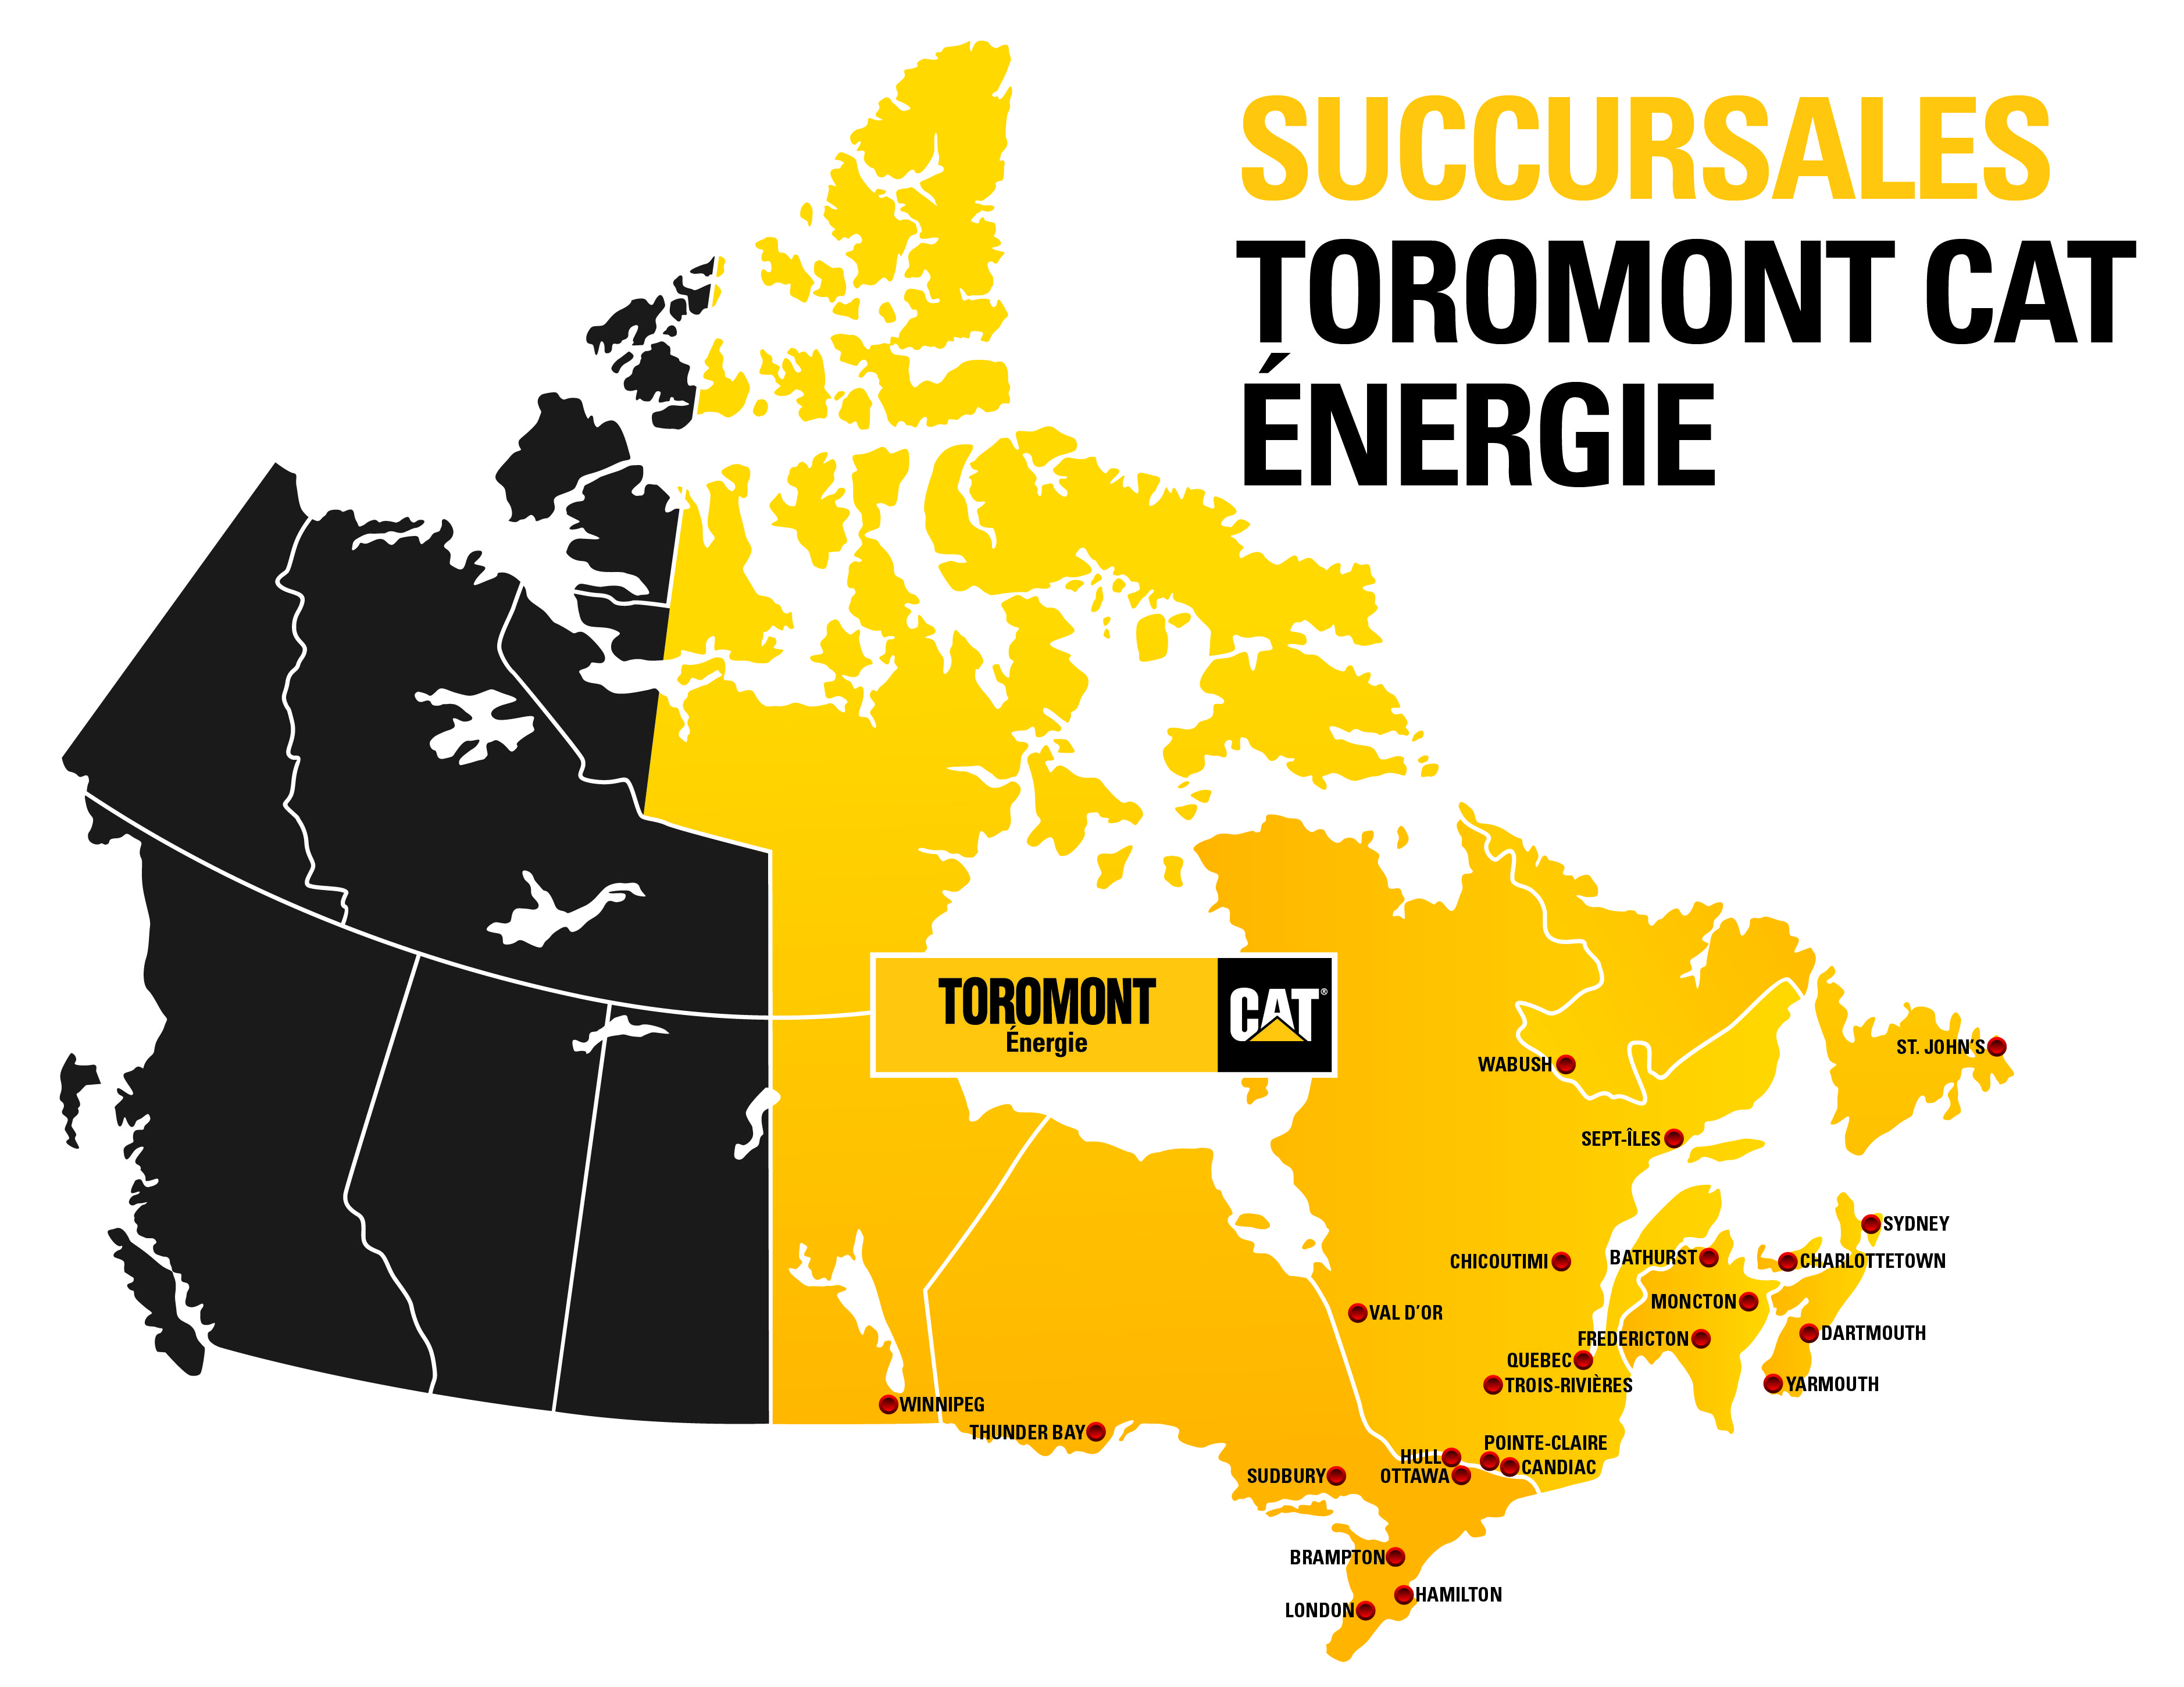 Toromont Power Systems Branch Map_2017-Labelled